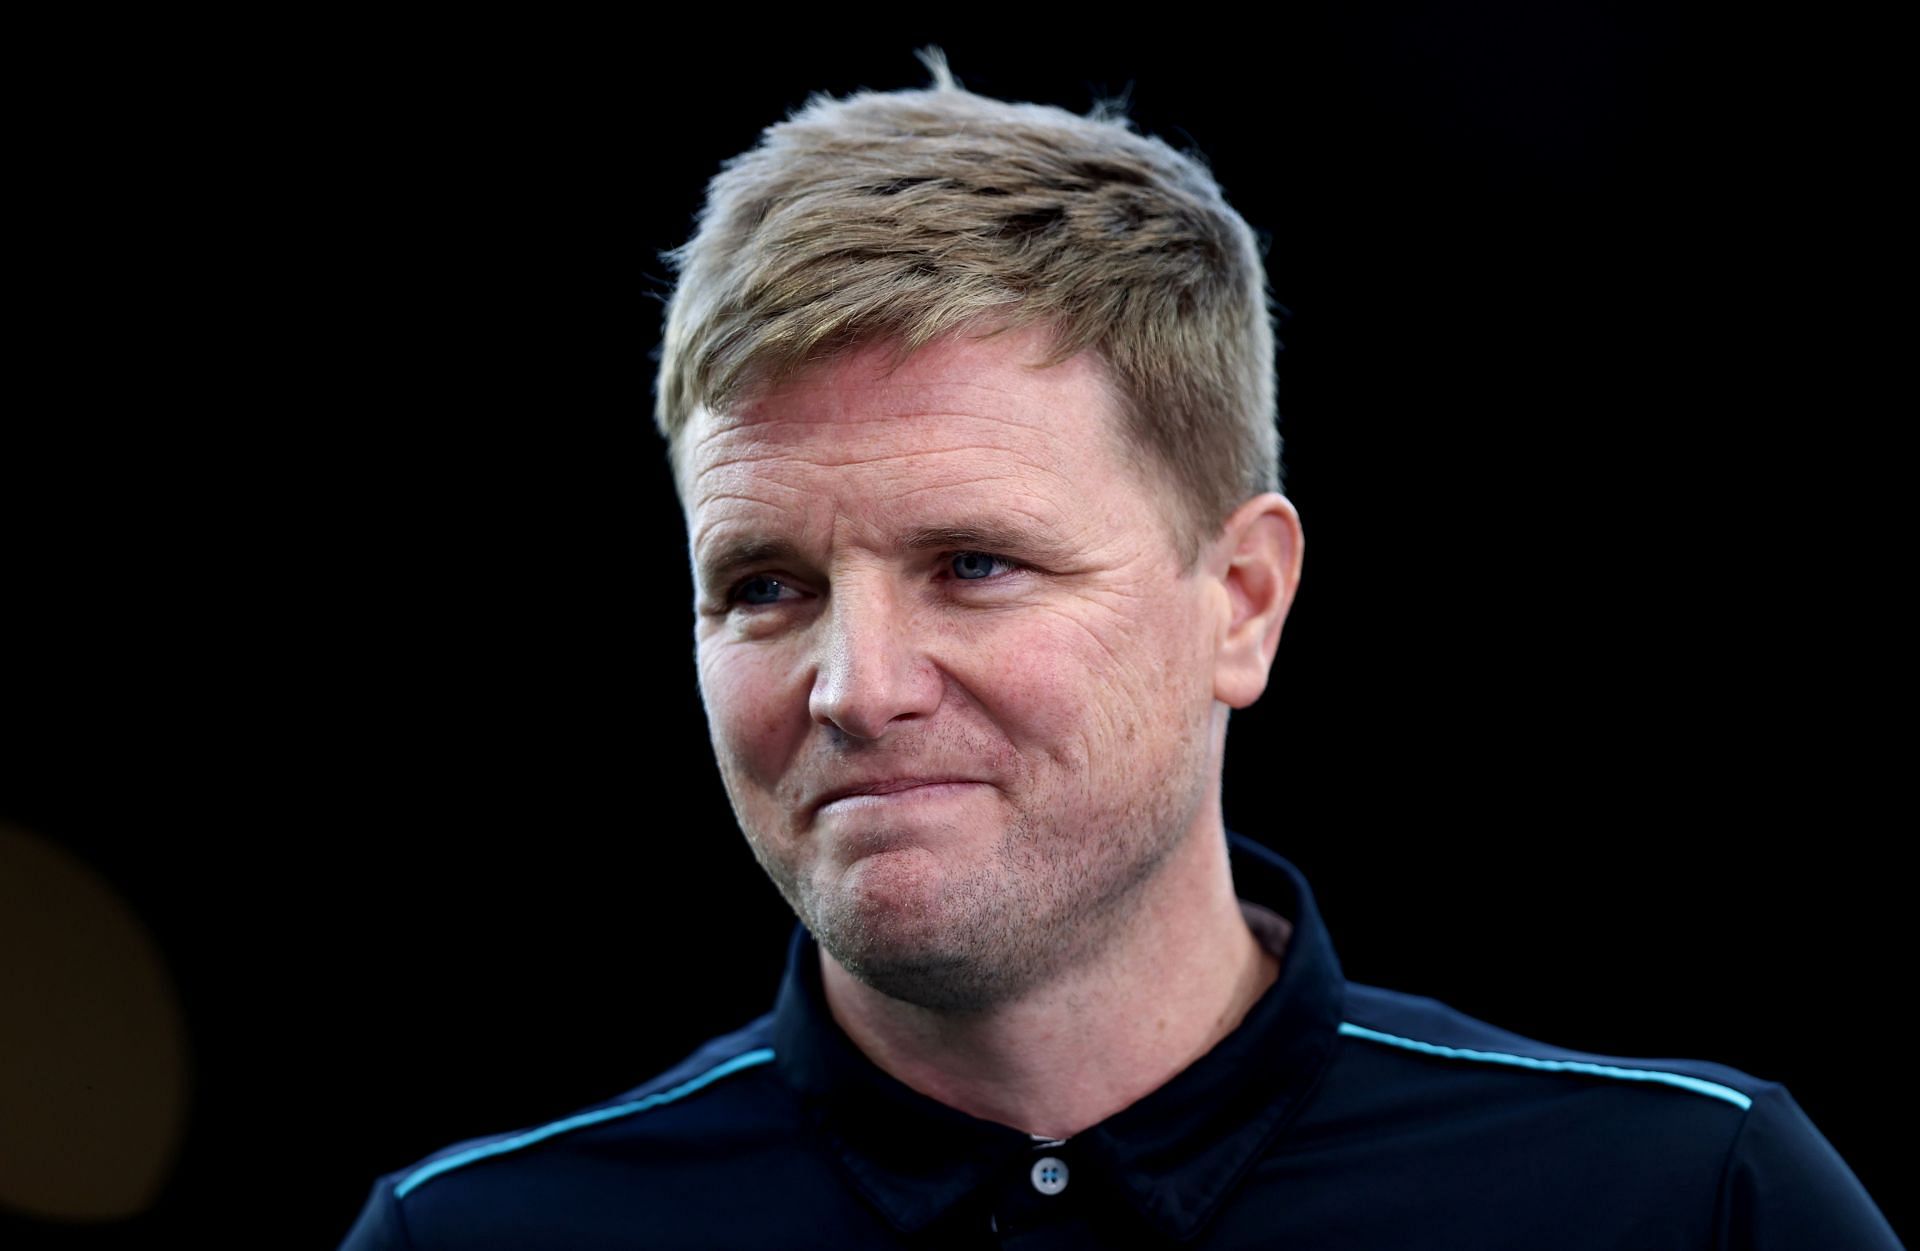 Eddie Howe & # 039; s Magpies may be about to deal damage